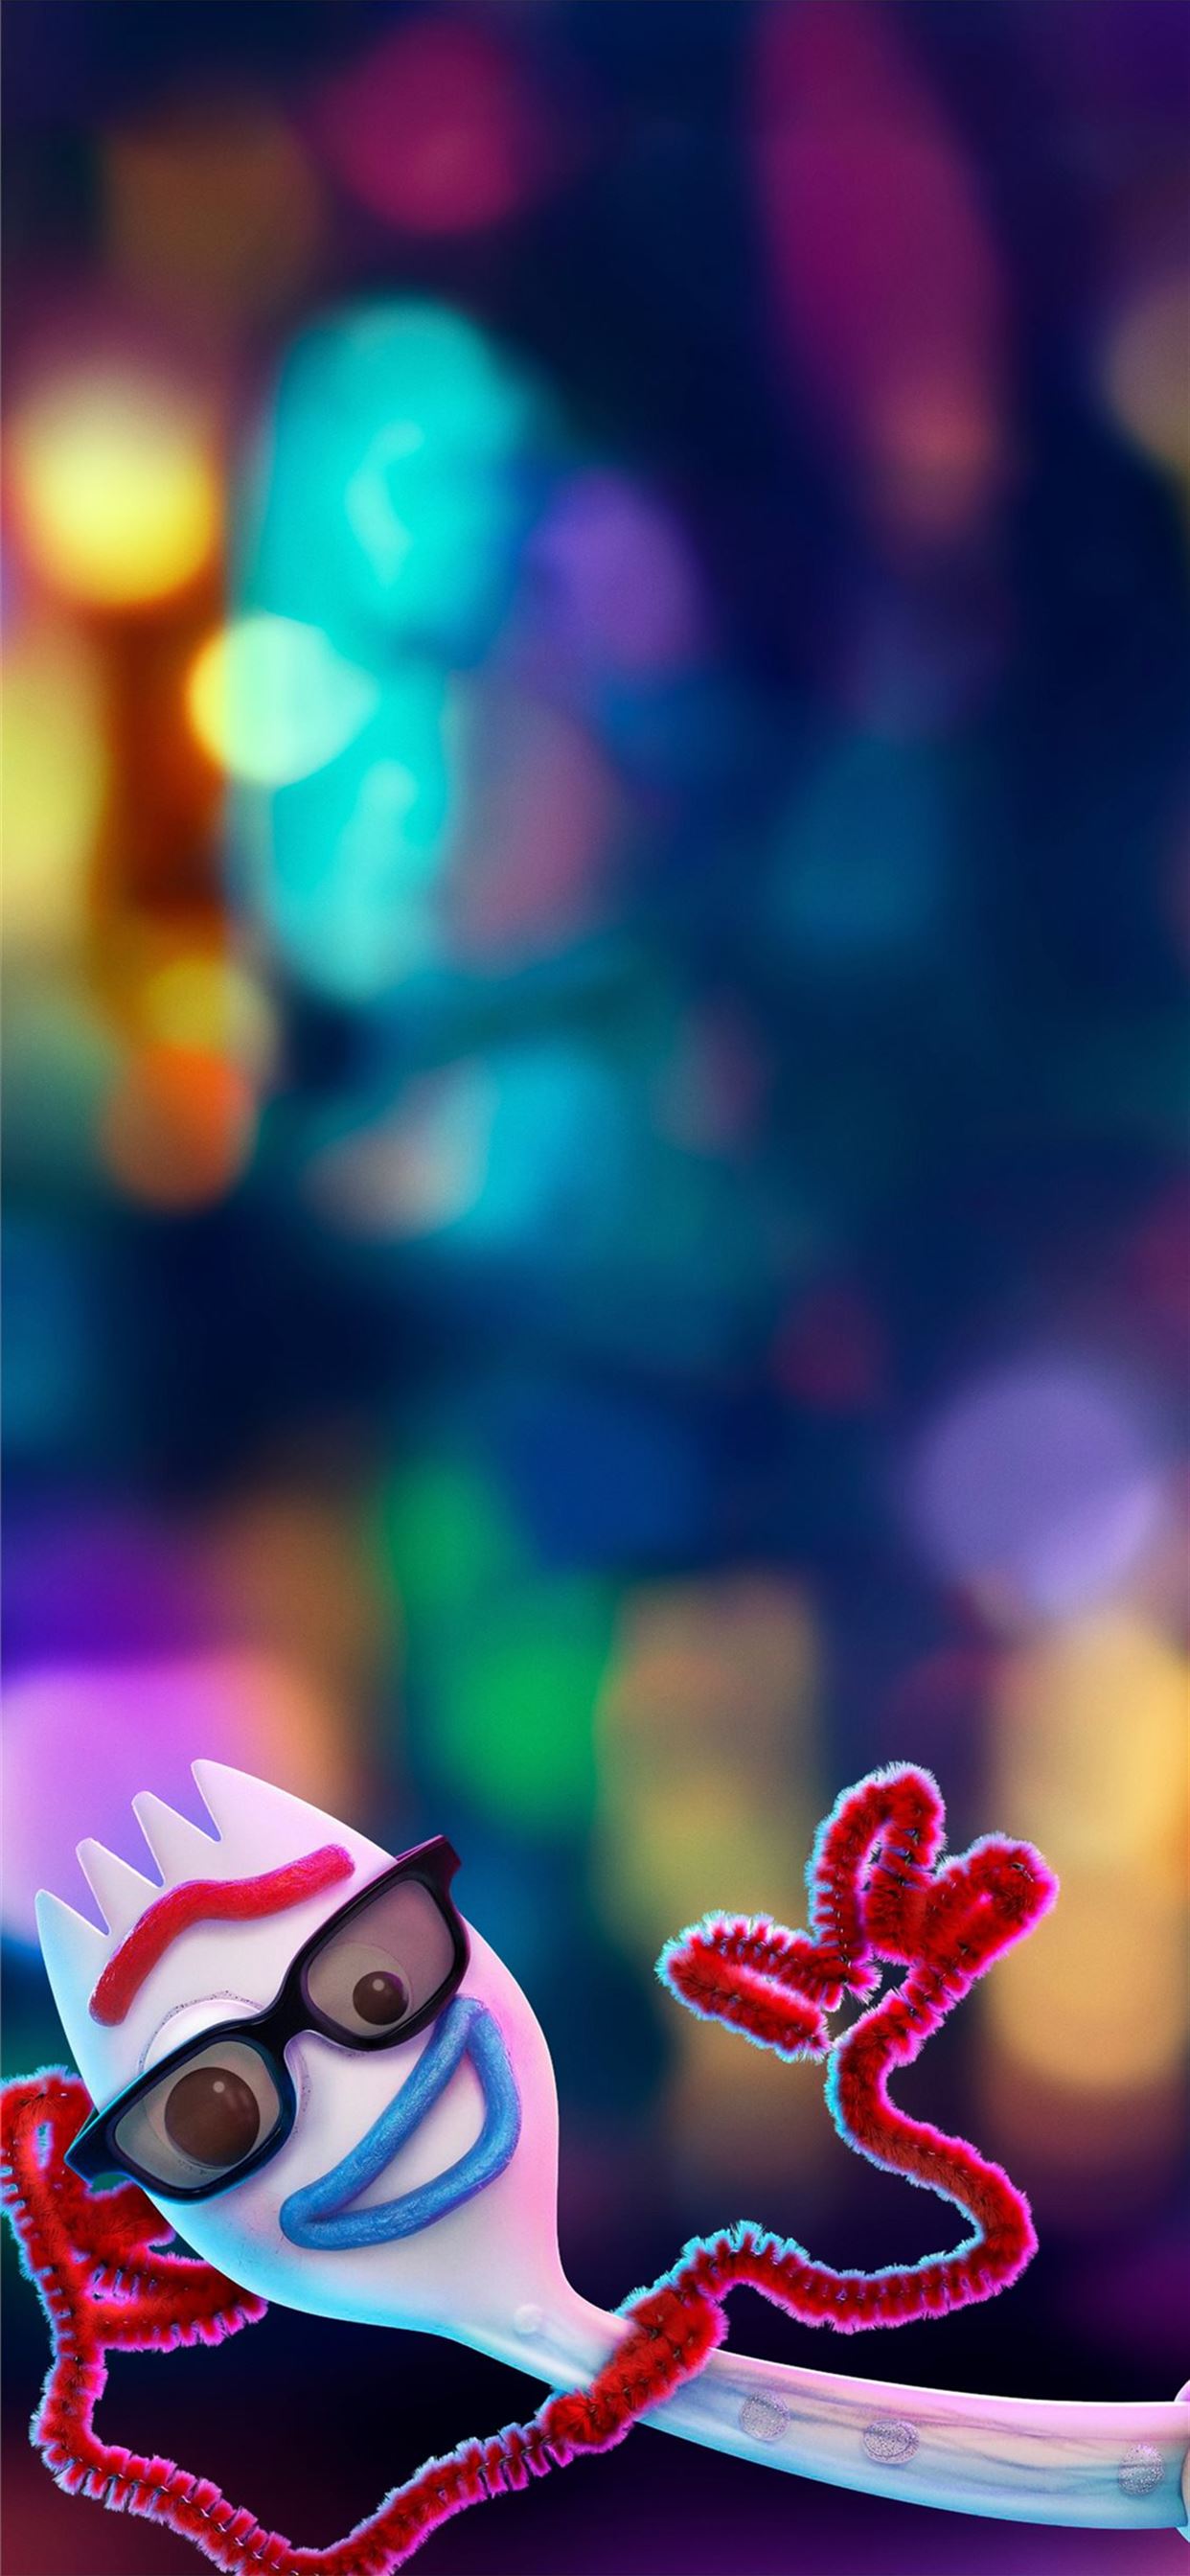 Wallpaper ID 384365  Movie Toy Story 4 Phone Wallpaper Woody Toy Story  1080x1920 free download